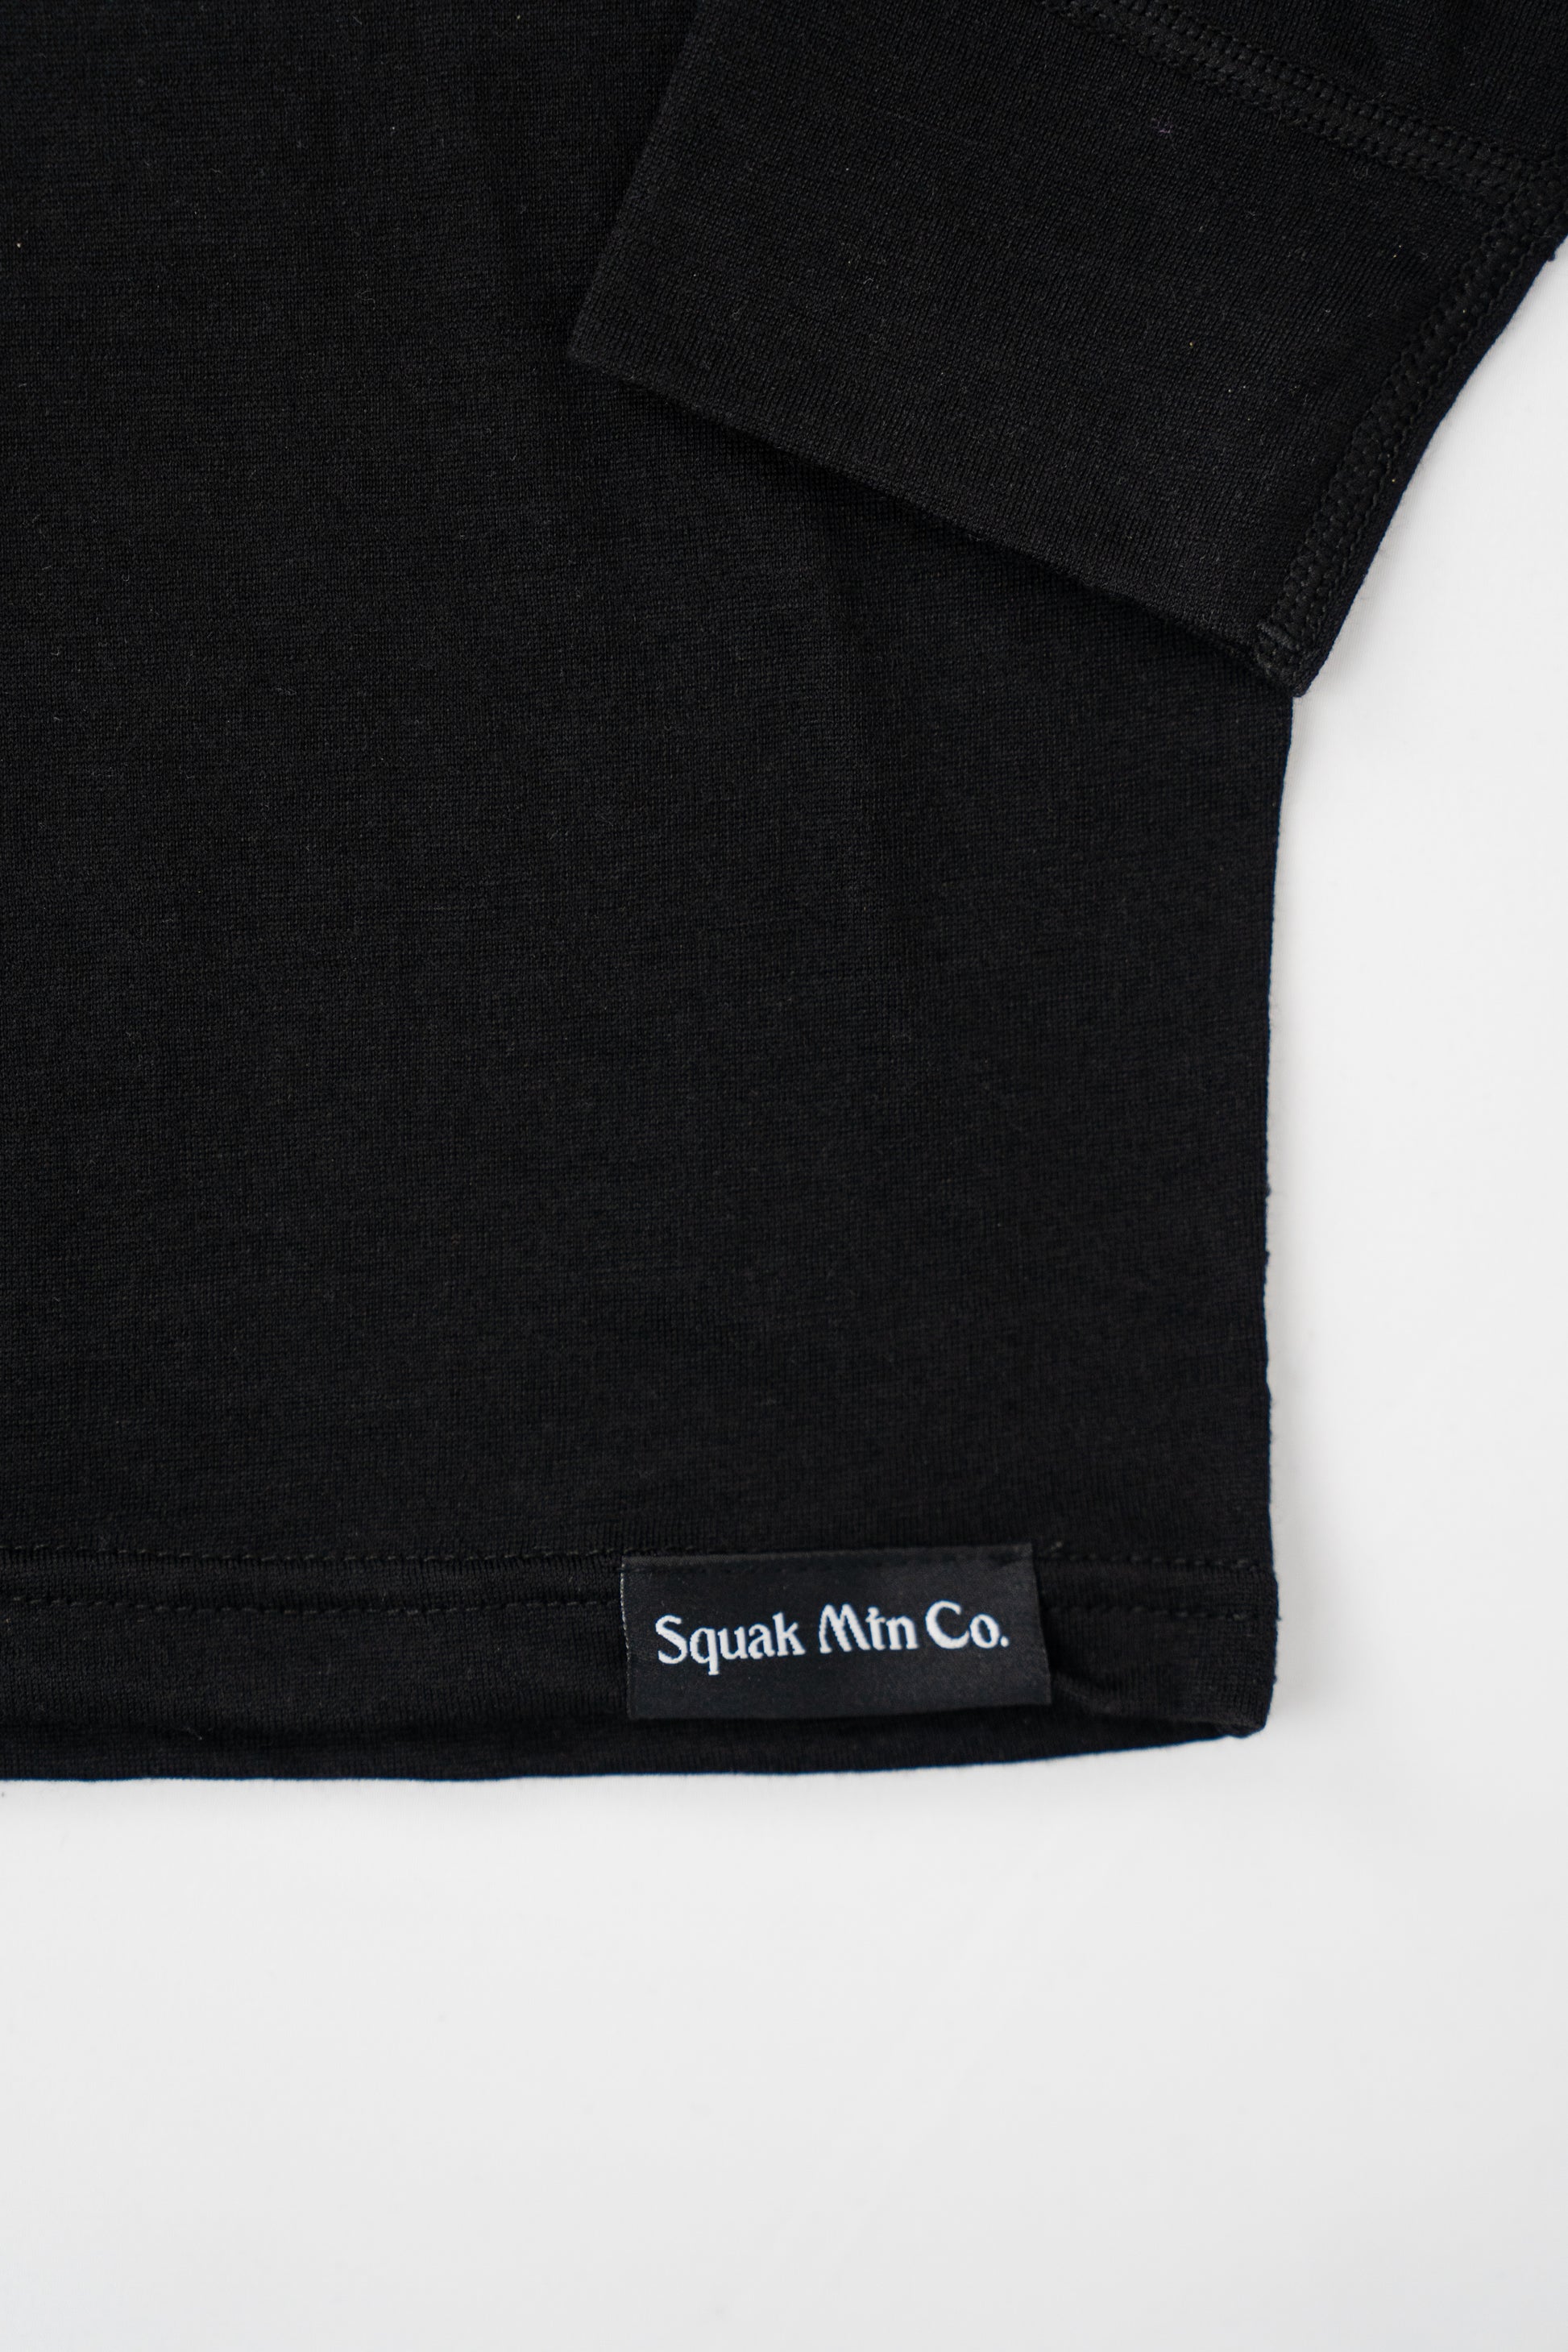 Logo on womens black wool base layer hoodie from Squak Mountain Co.